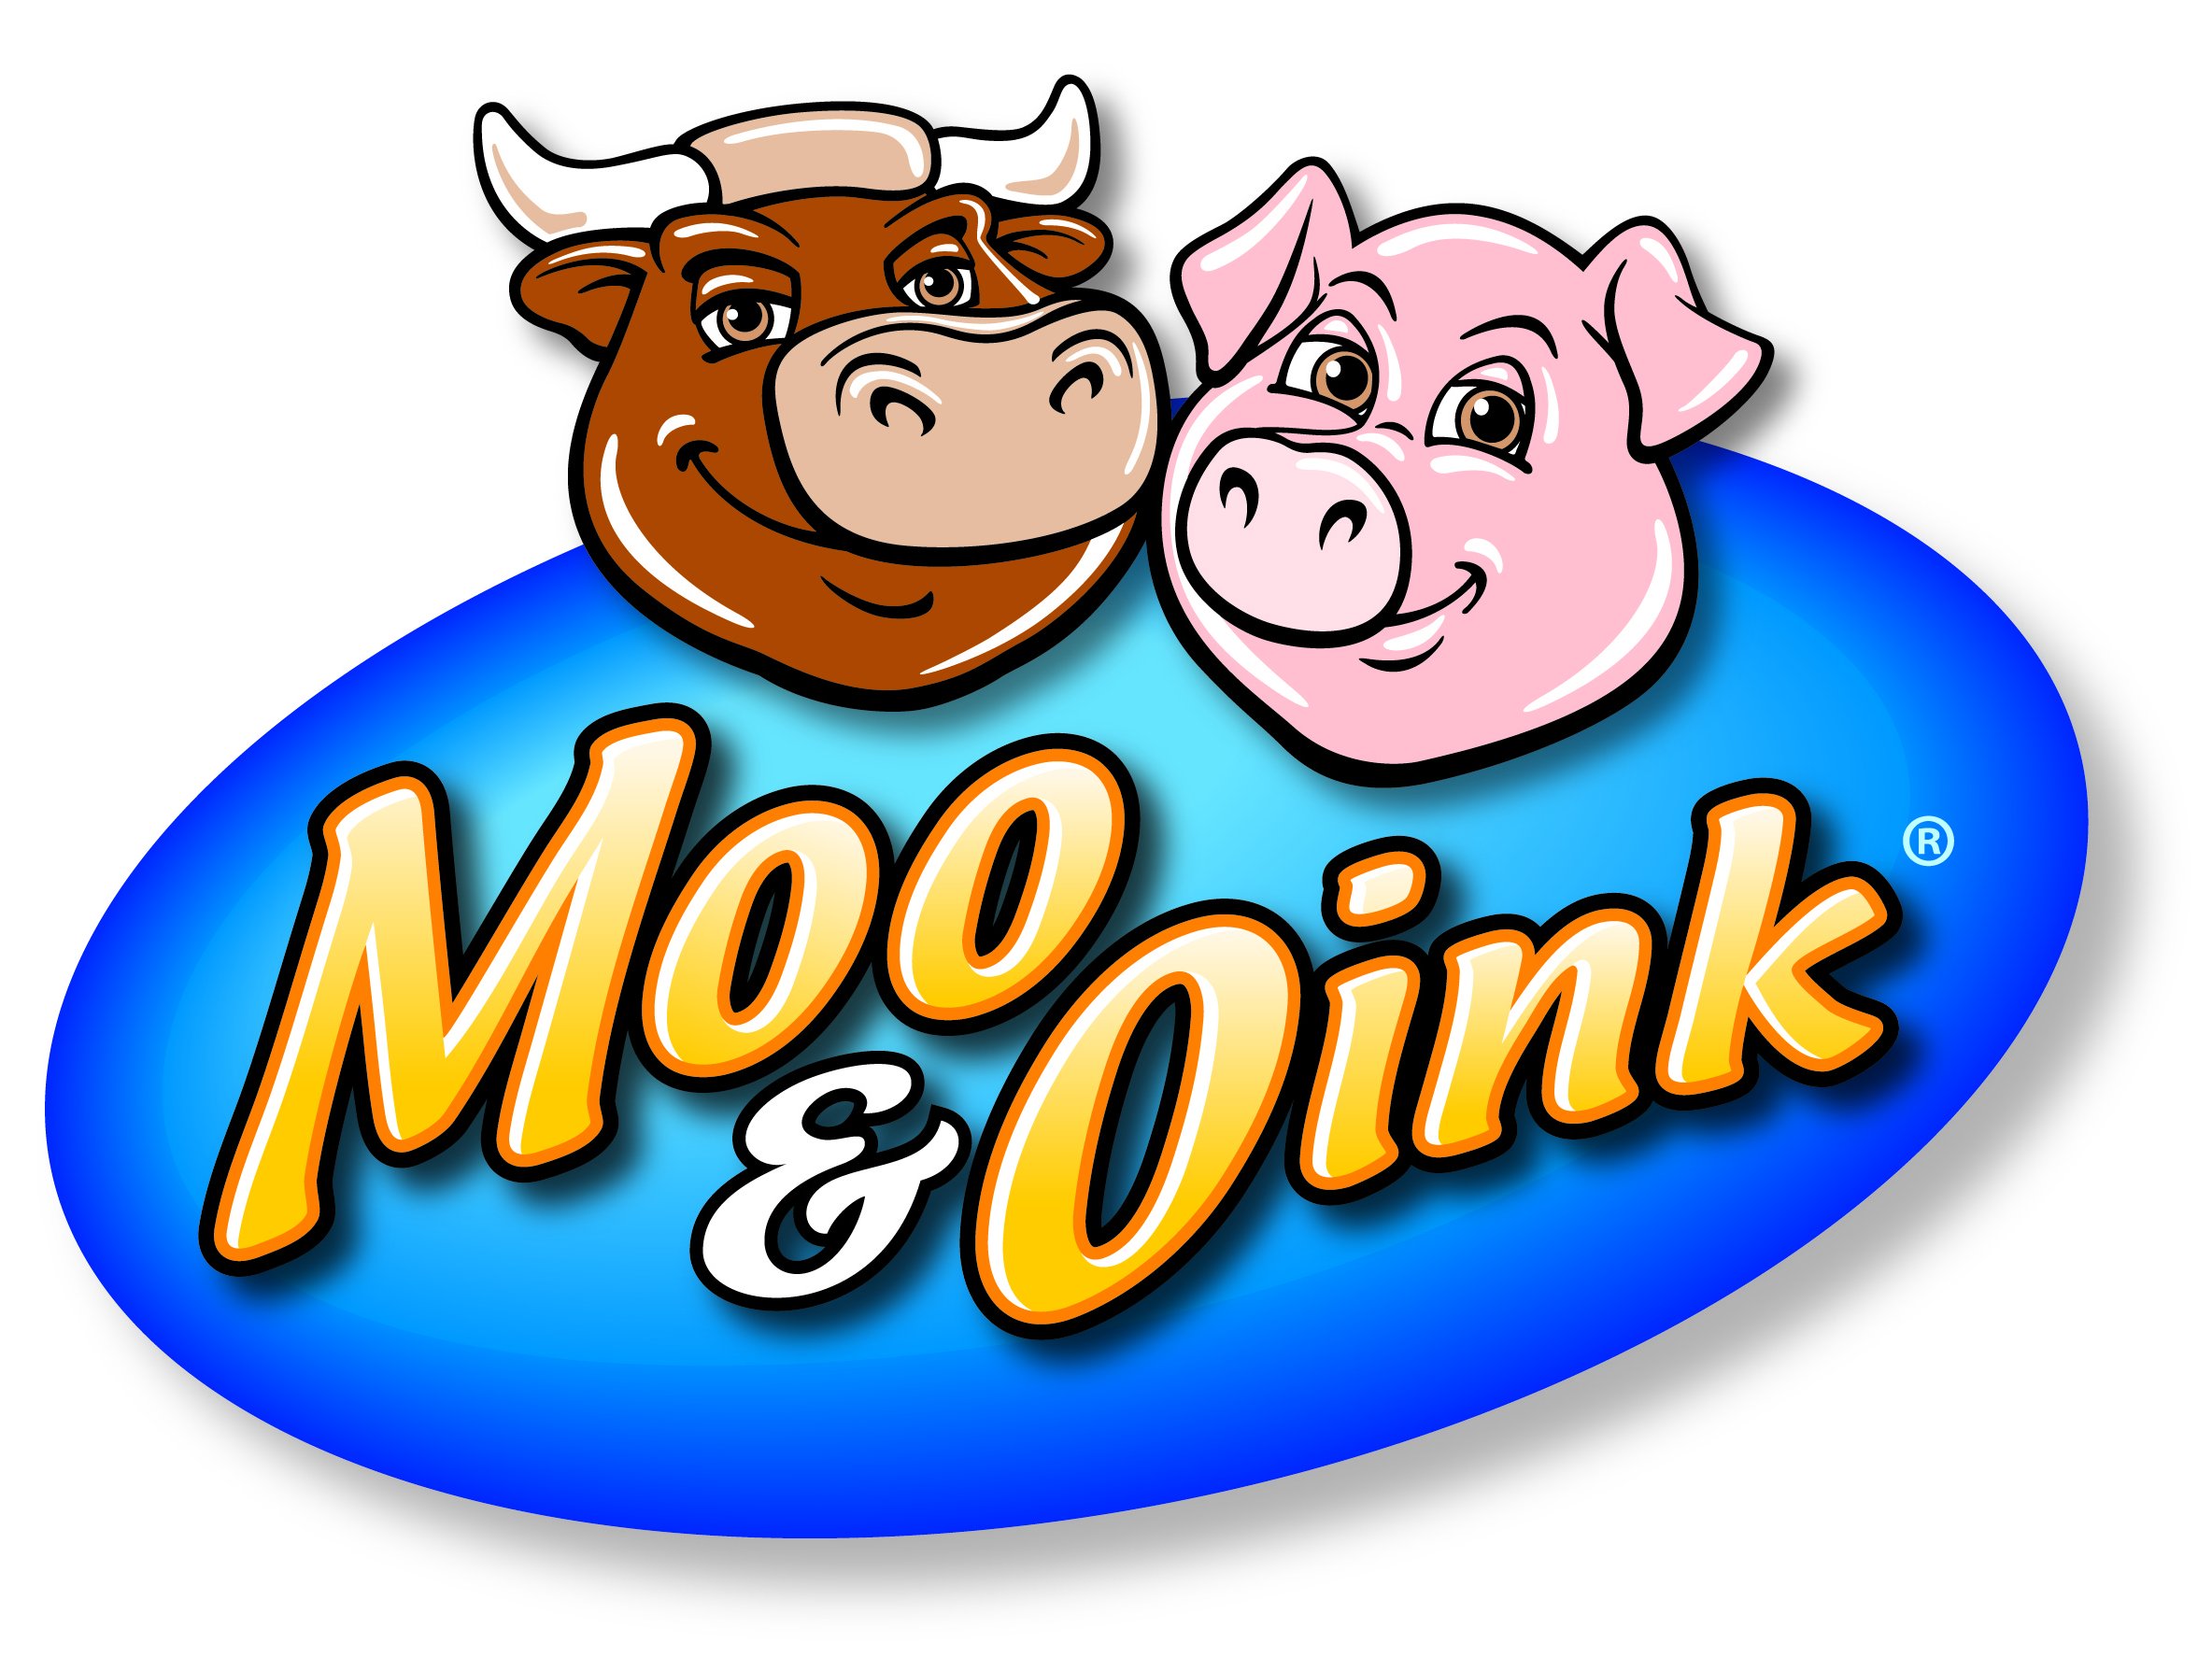 Moo & Oink provides an array of Chicago-style BBQ meats and grilling essentials